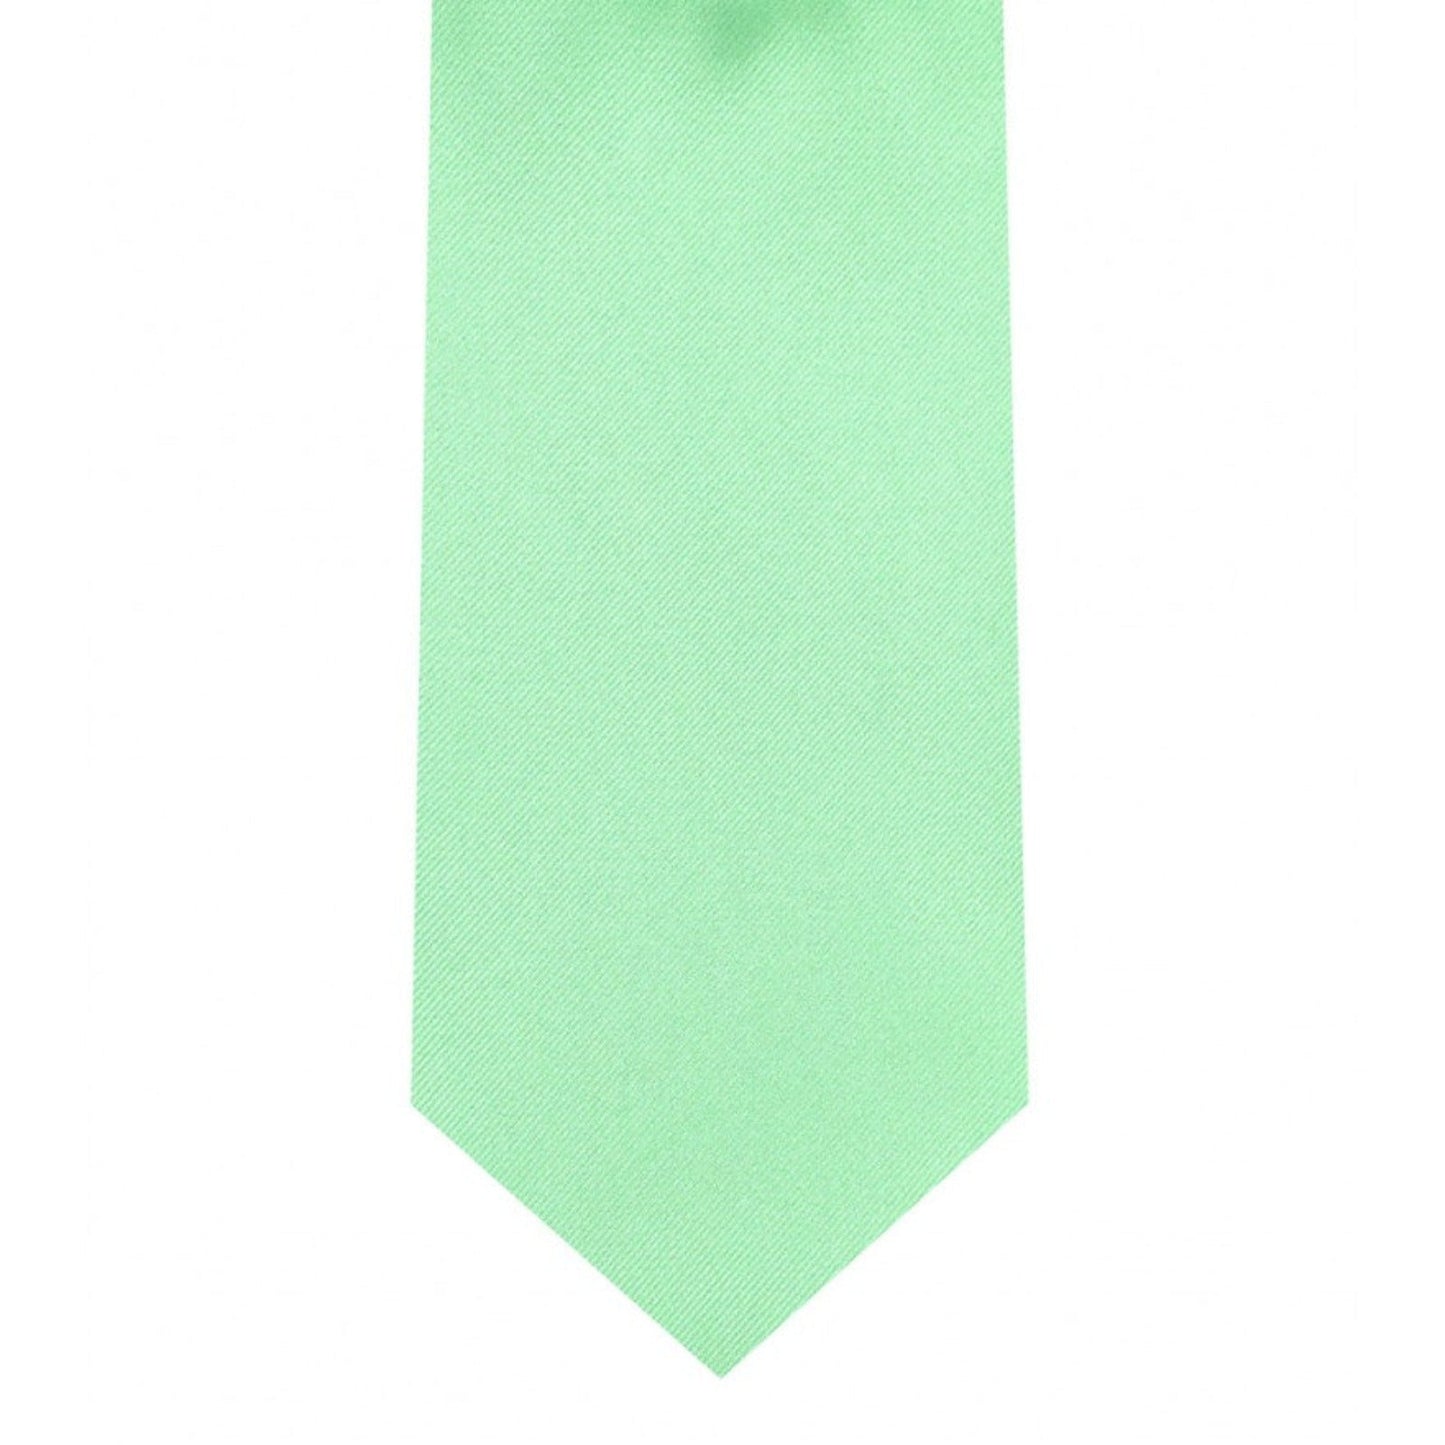 Classic Pastel Green Tie Skinny width 2.75 inches With Matching Pocket Square | KCT Menswear 